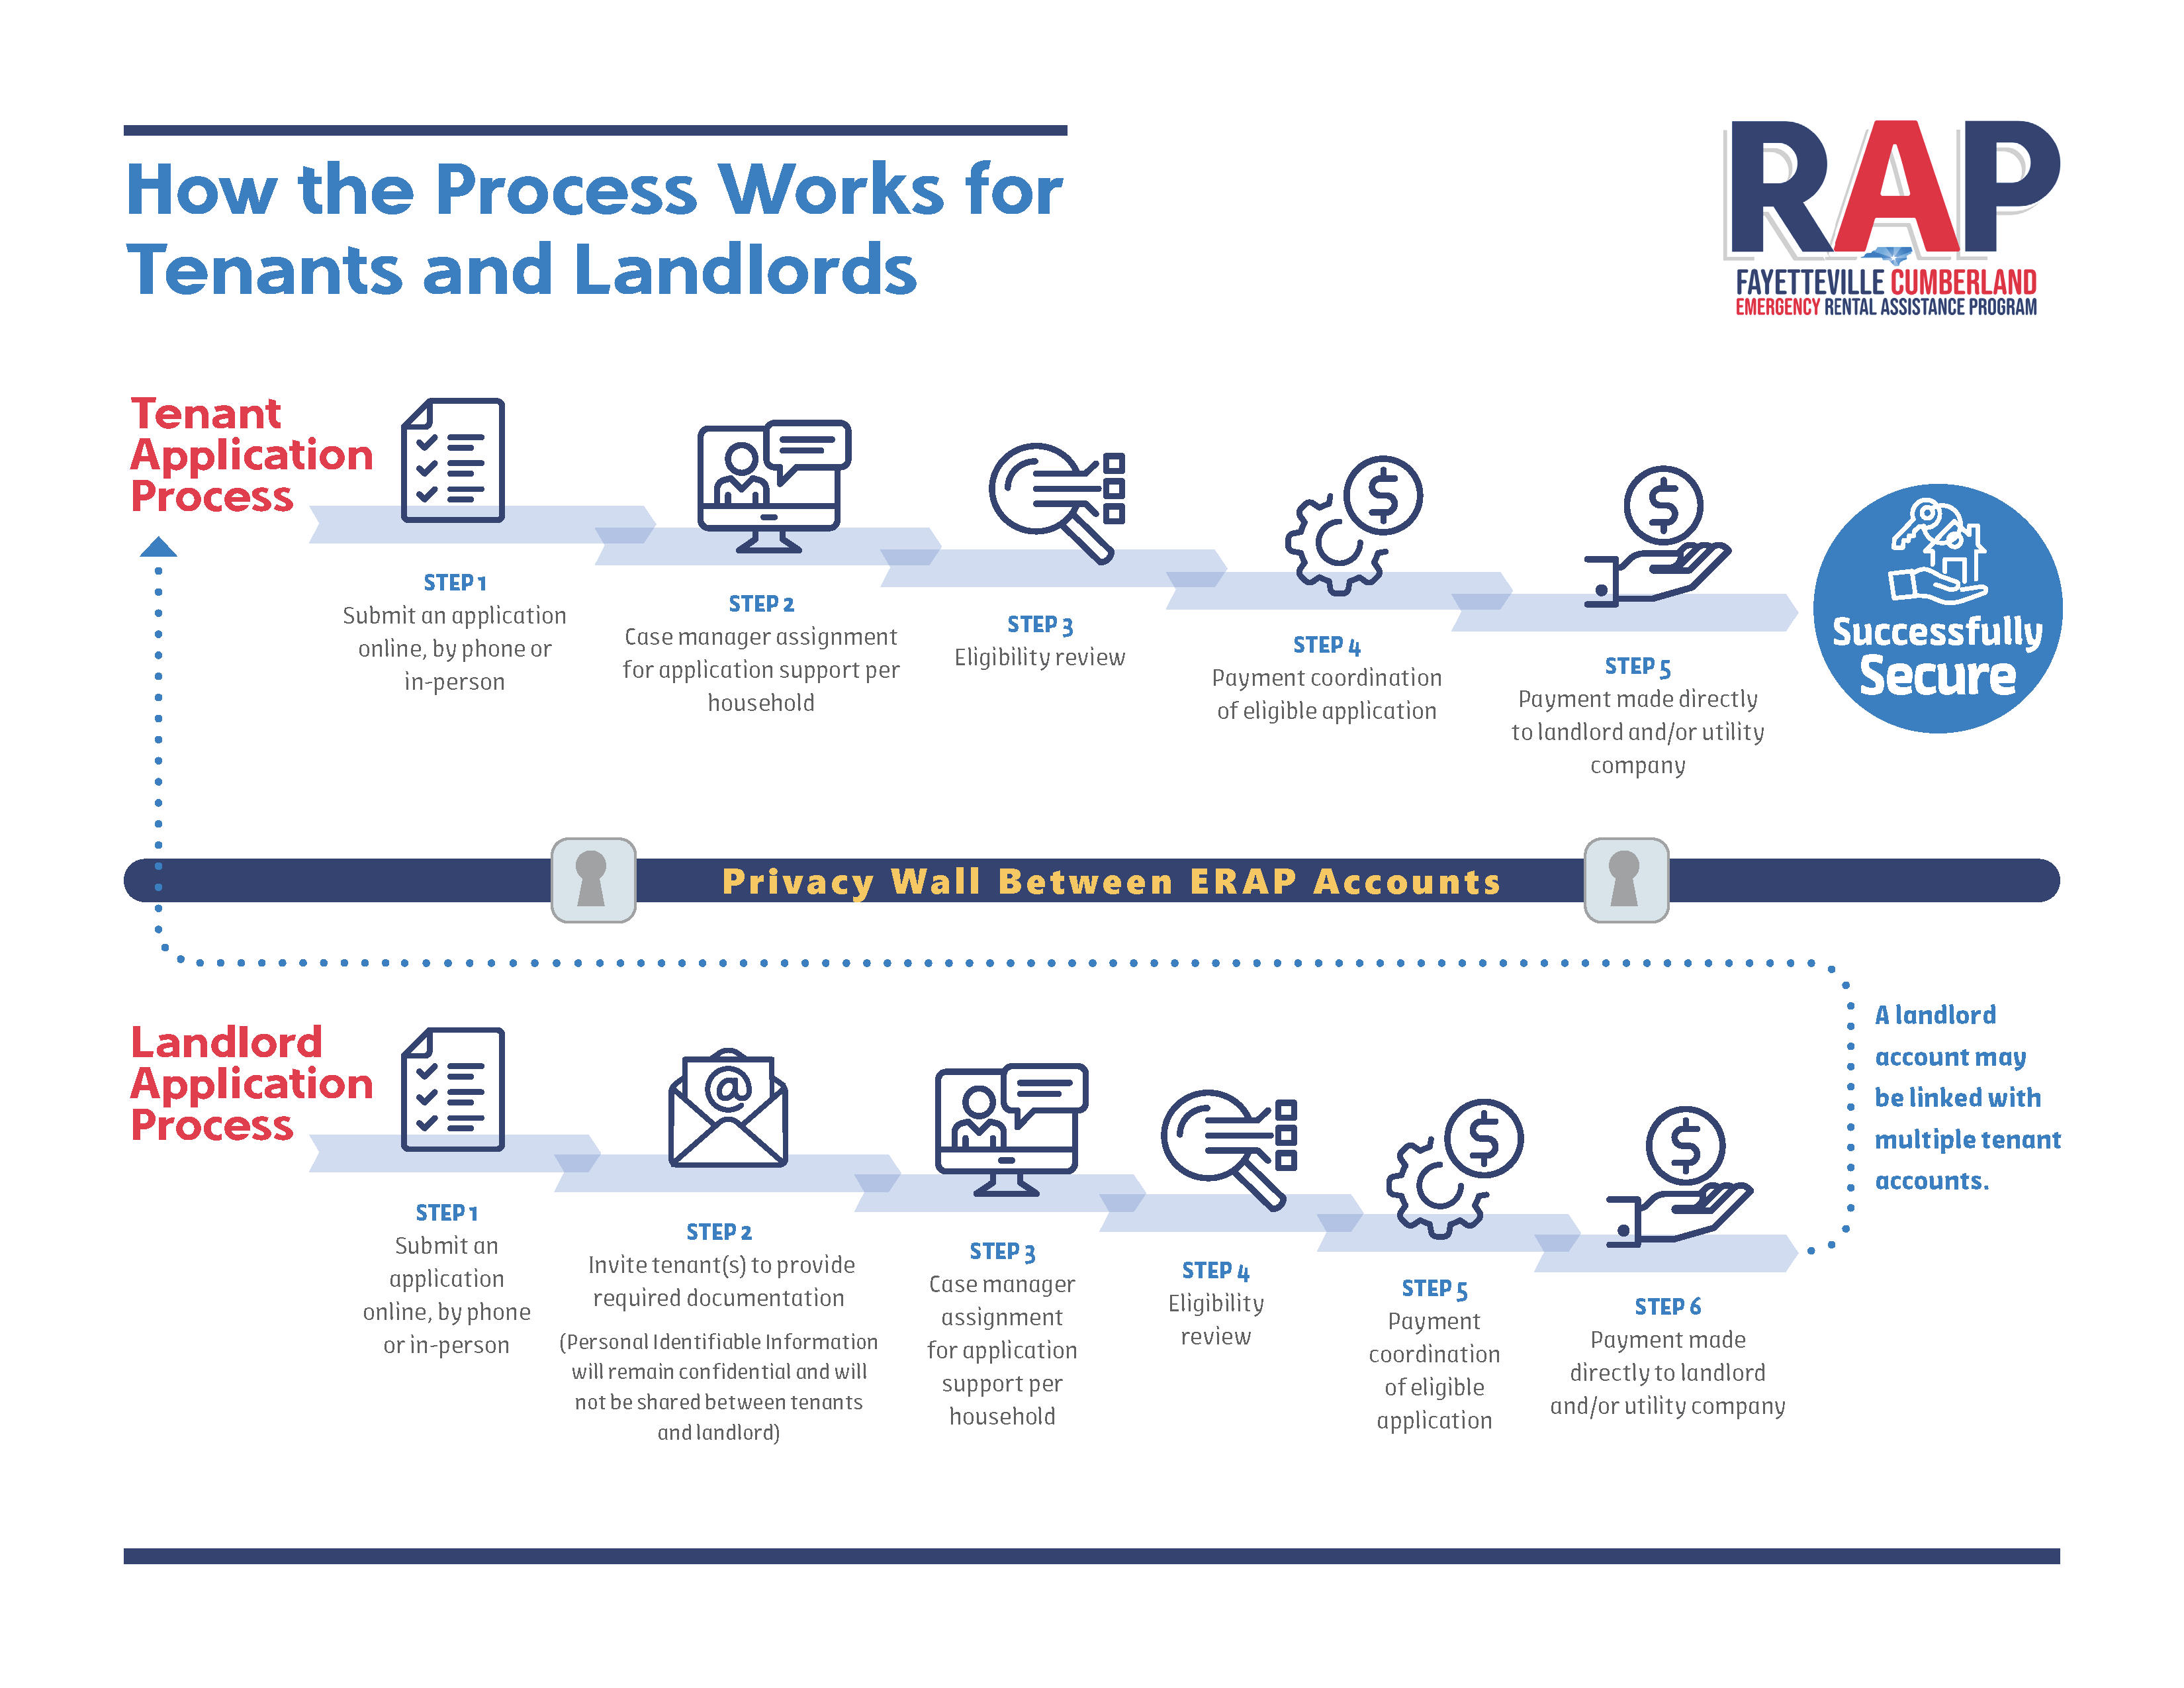 RAP Process for Tenants and Landlords